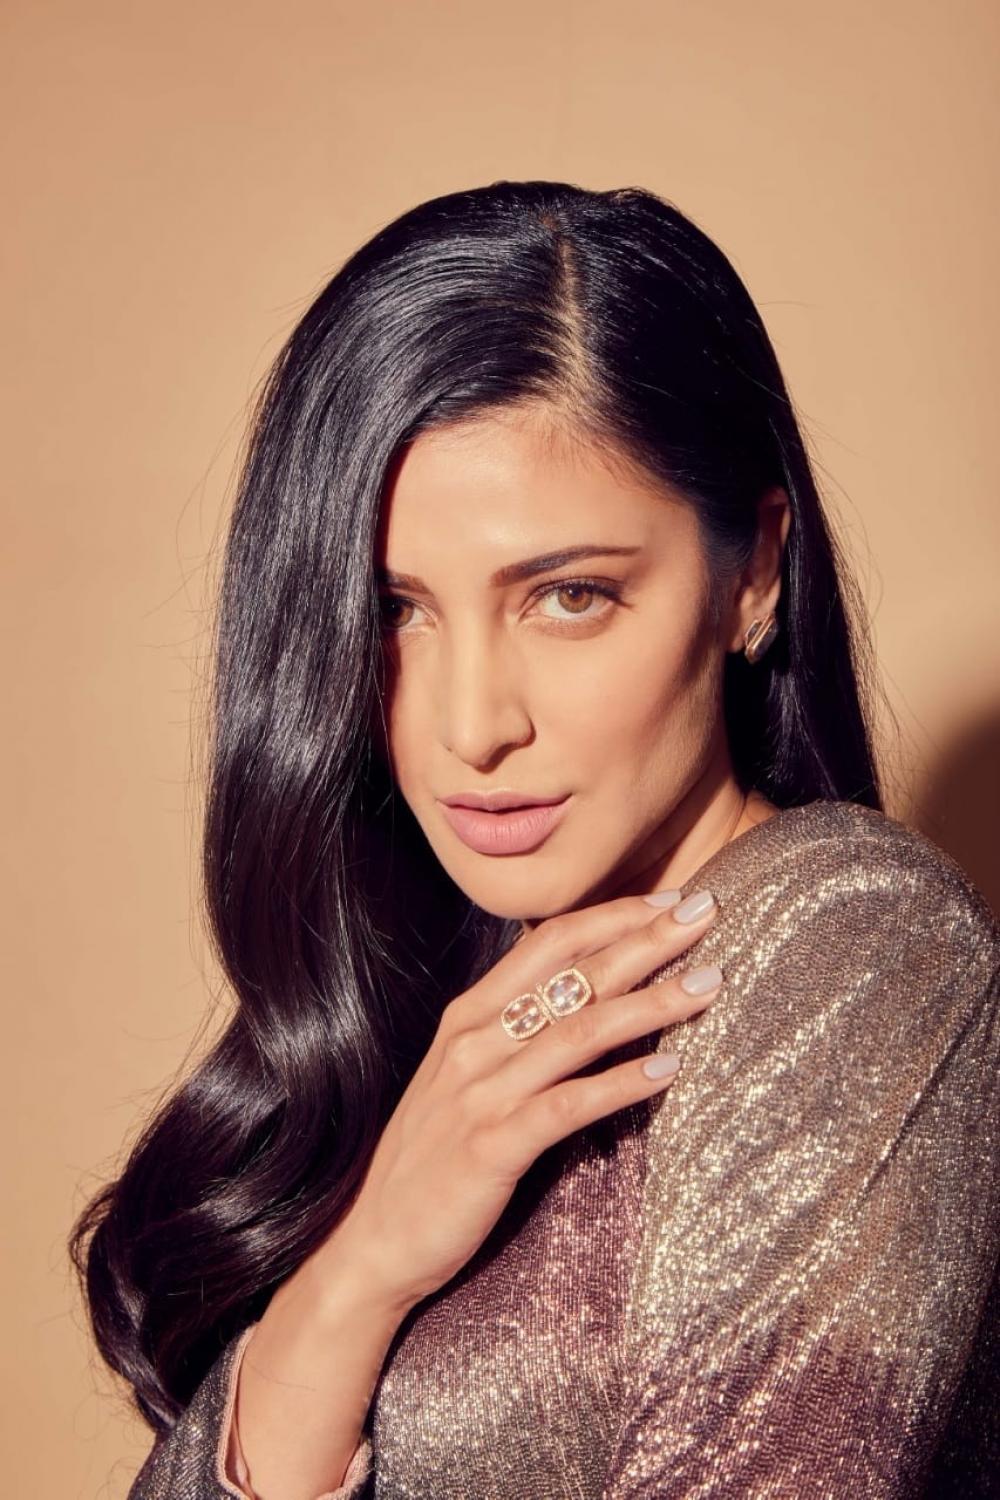 The Weekend Leader - Shruti Haasan: I want to share my truth and speak with ease